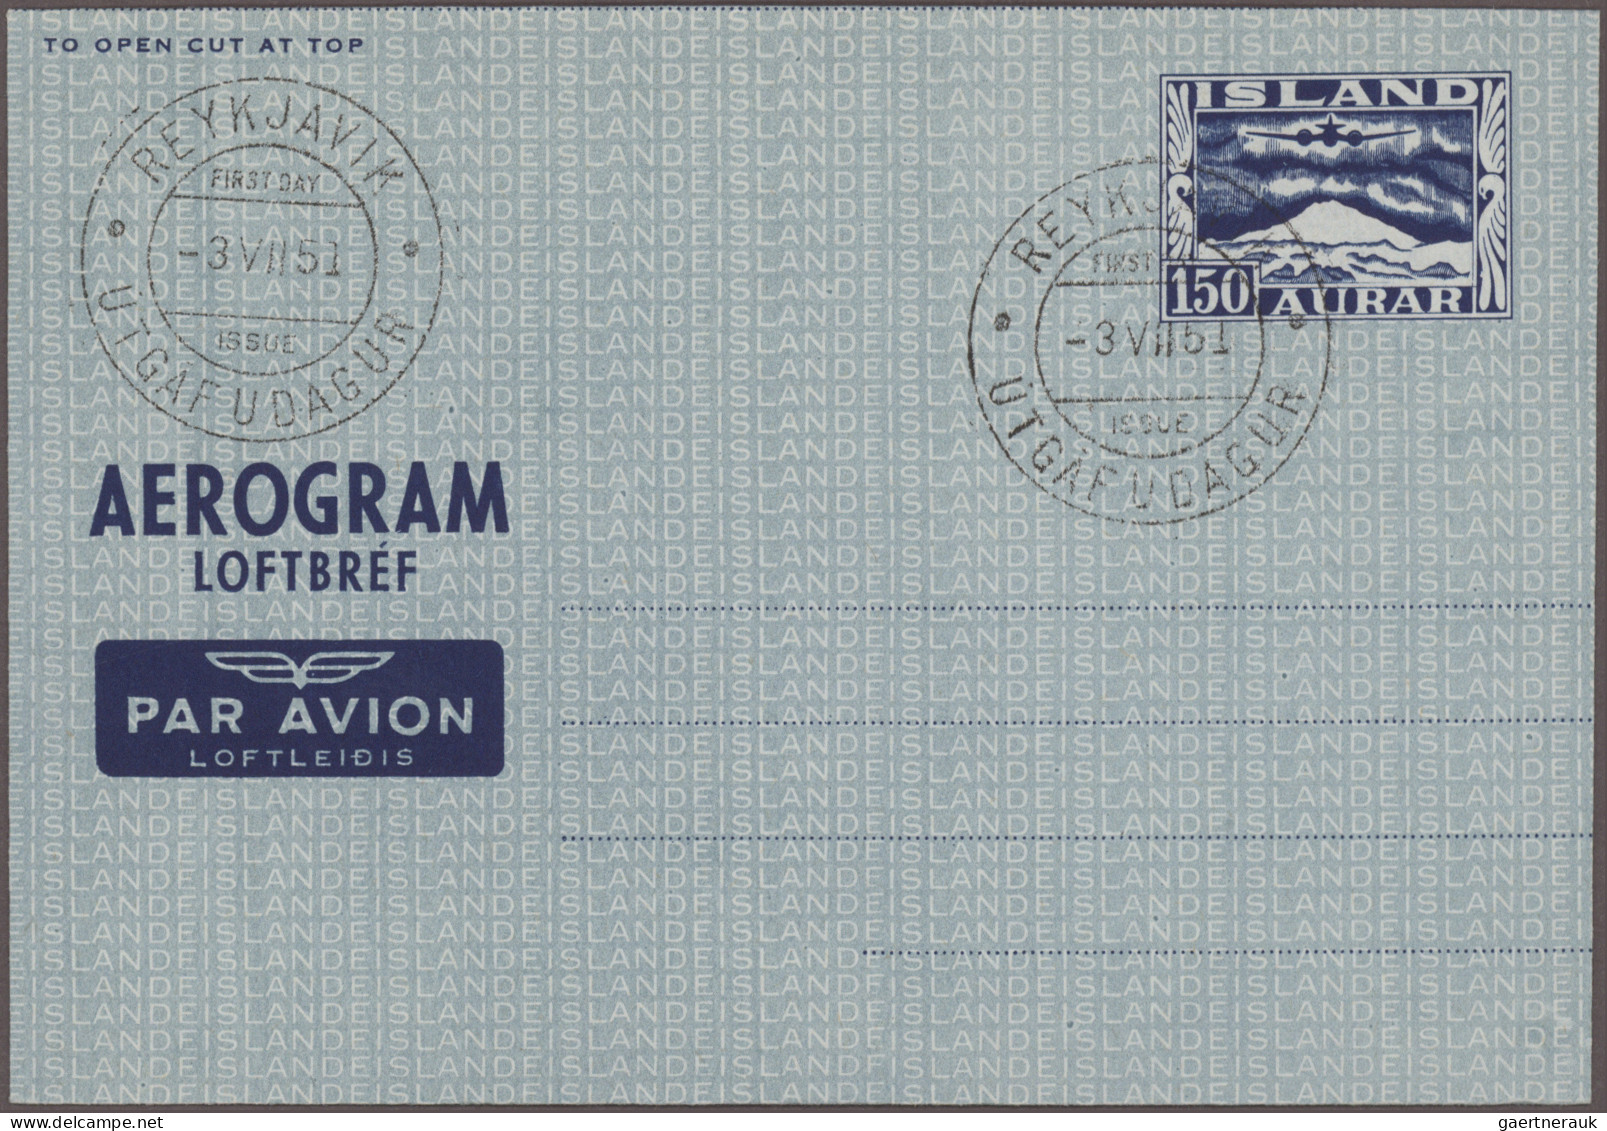 Aerogramme - Europe: 1950/1995 (ca.), holding of apprx. 415 air letter sheets, m